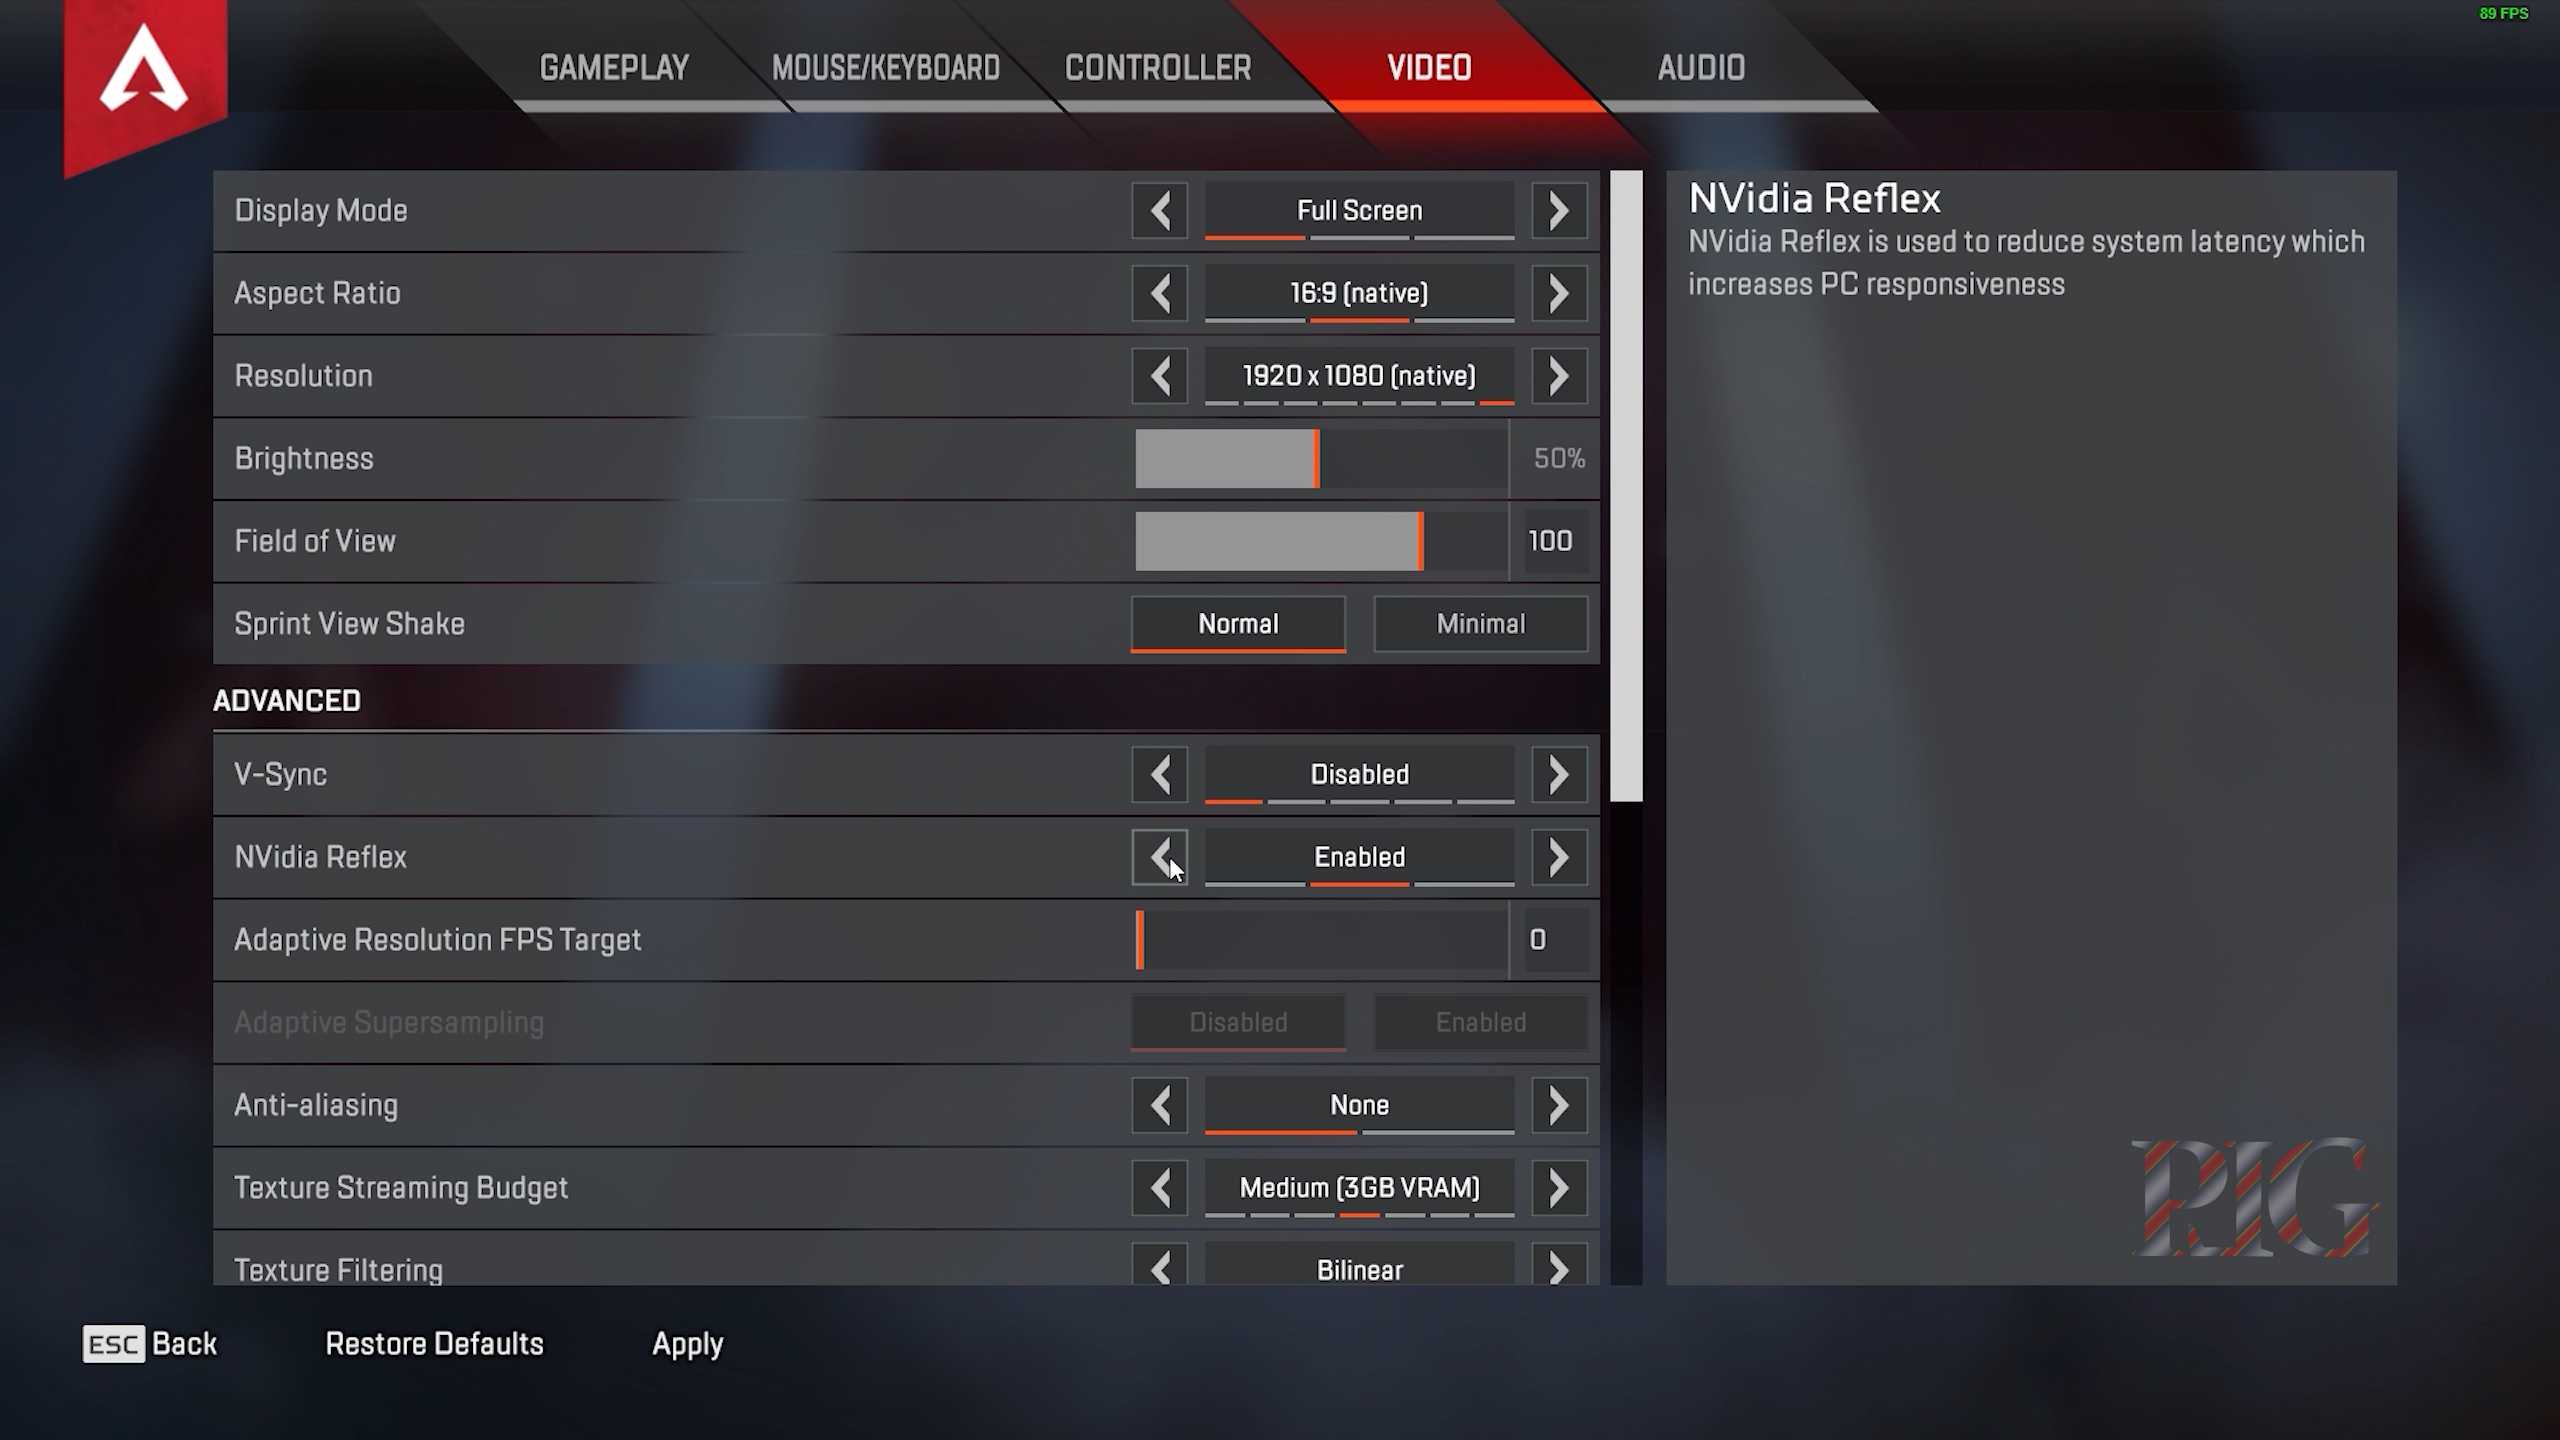 Apex Legends - (UPDATED) Competitive Configuration For Stable Low Latency